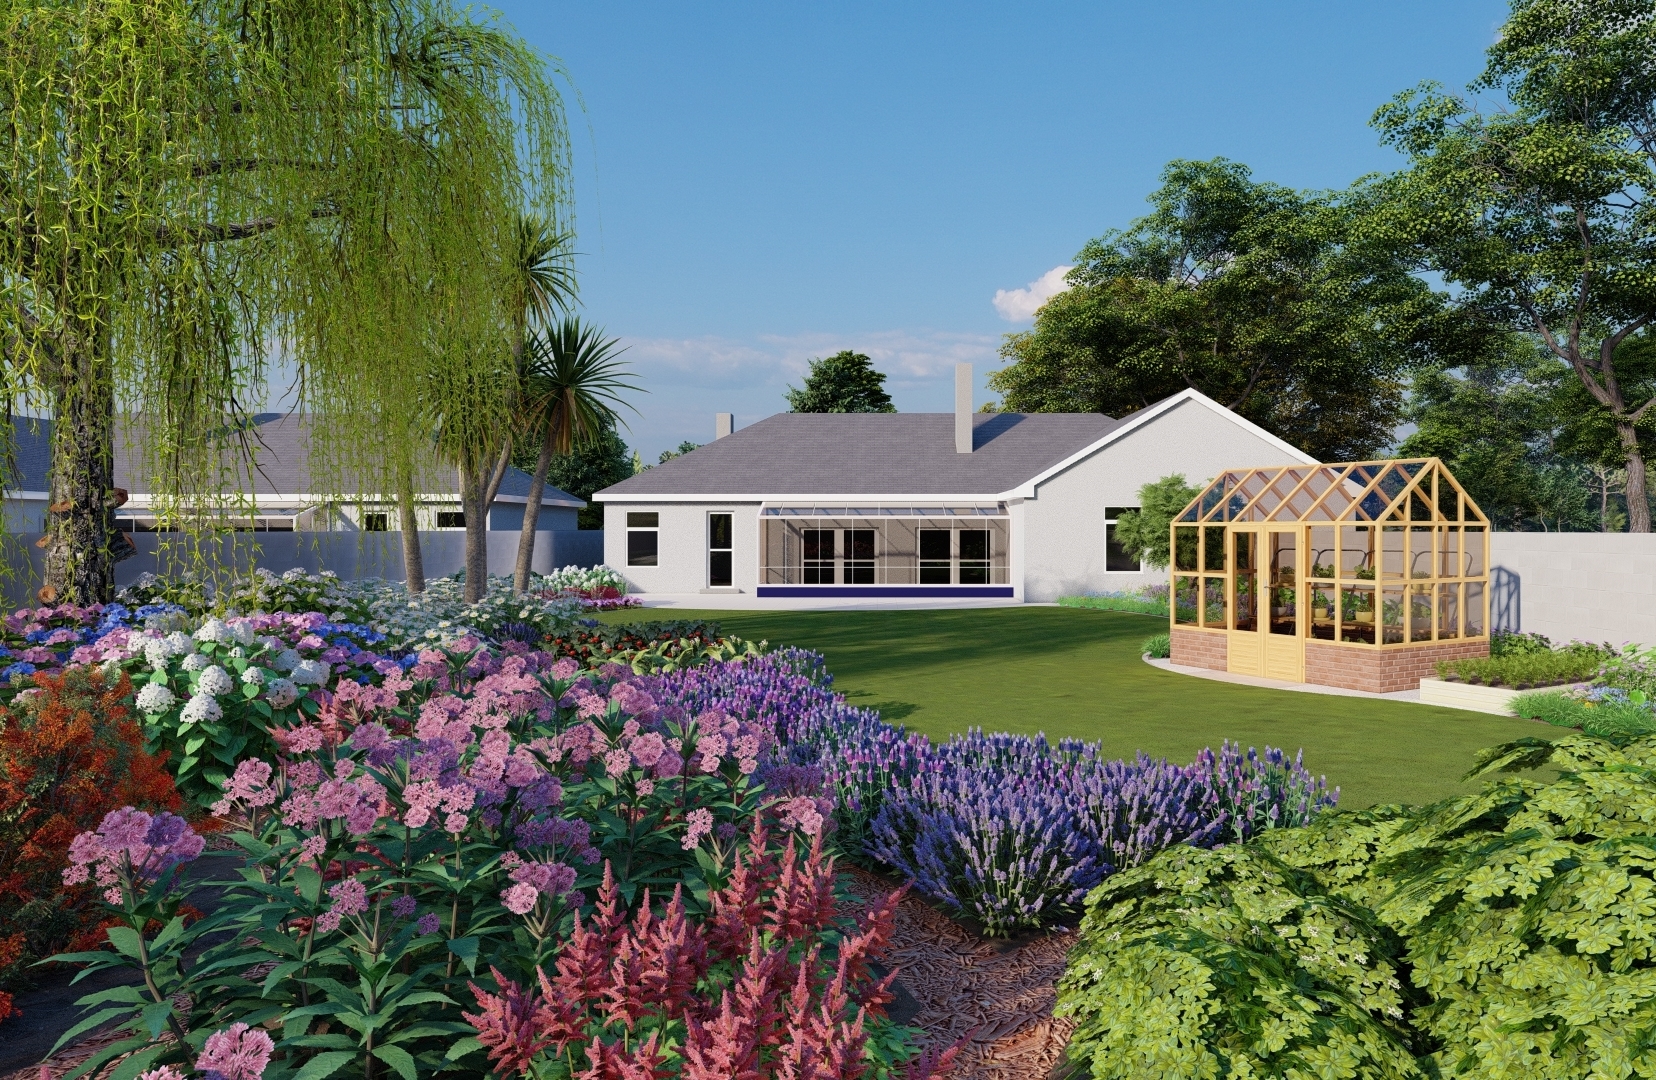 Visuals for a large Family Garden with Greenhouse, Growing Beds, extensive planted borders, beds and 'adventure' trail area featuring planted roundabouts/mounds in Knocklyon. ing bespoke horizontal timber screening, natural grass lawn, limestone paving, Biohort Garden Shed and mixed low maintenance  planting.